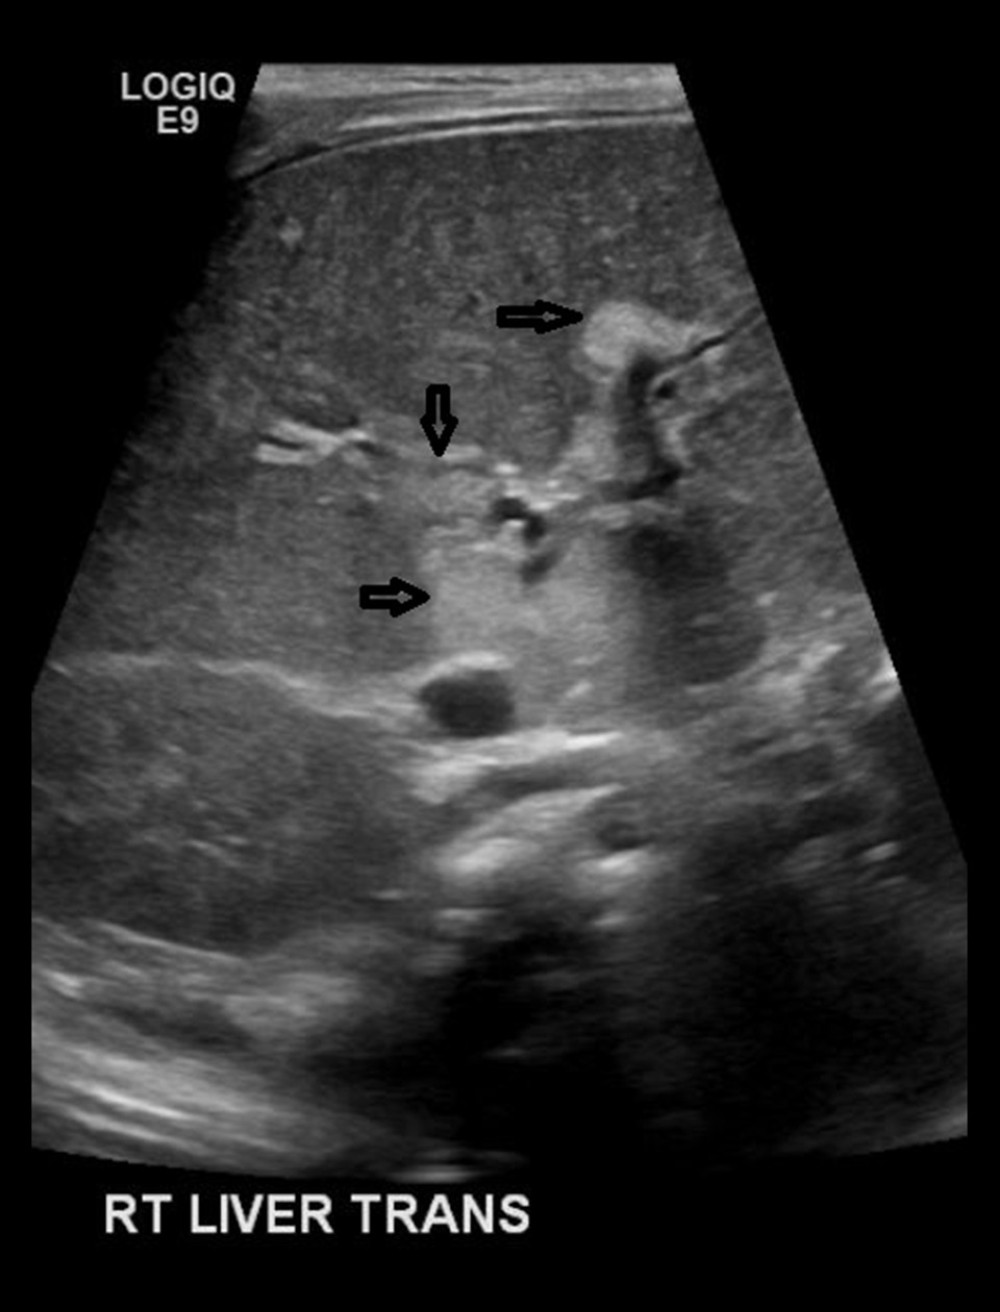 Transverse sonographic image of the liver in the periportal region shows ill-defined hyper-echoic regions adjacent to the portal vessels (arrows) which can reflect periportal fibrosis.